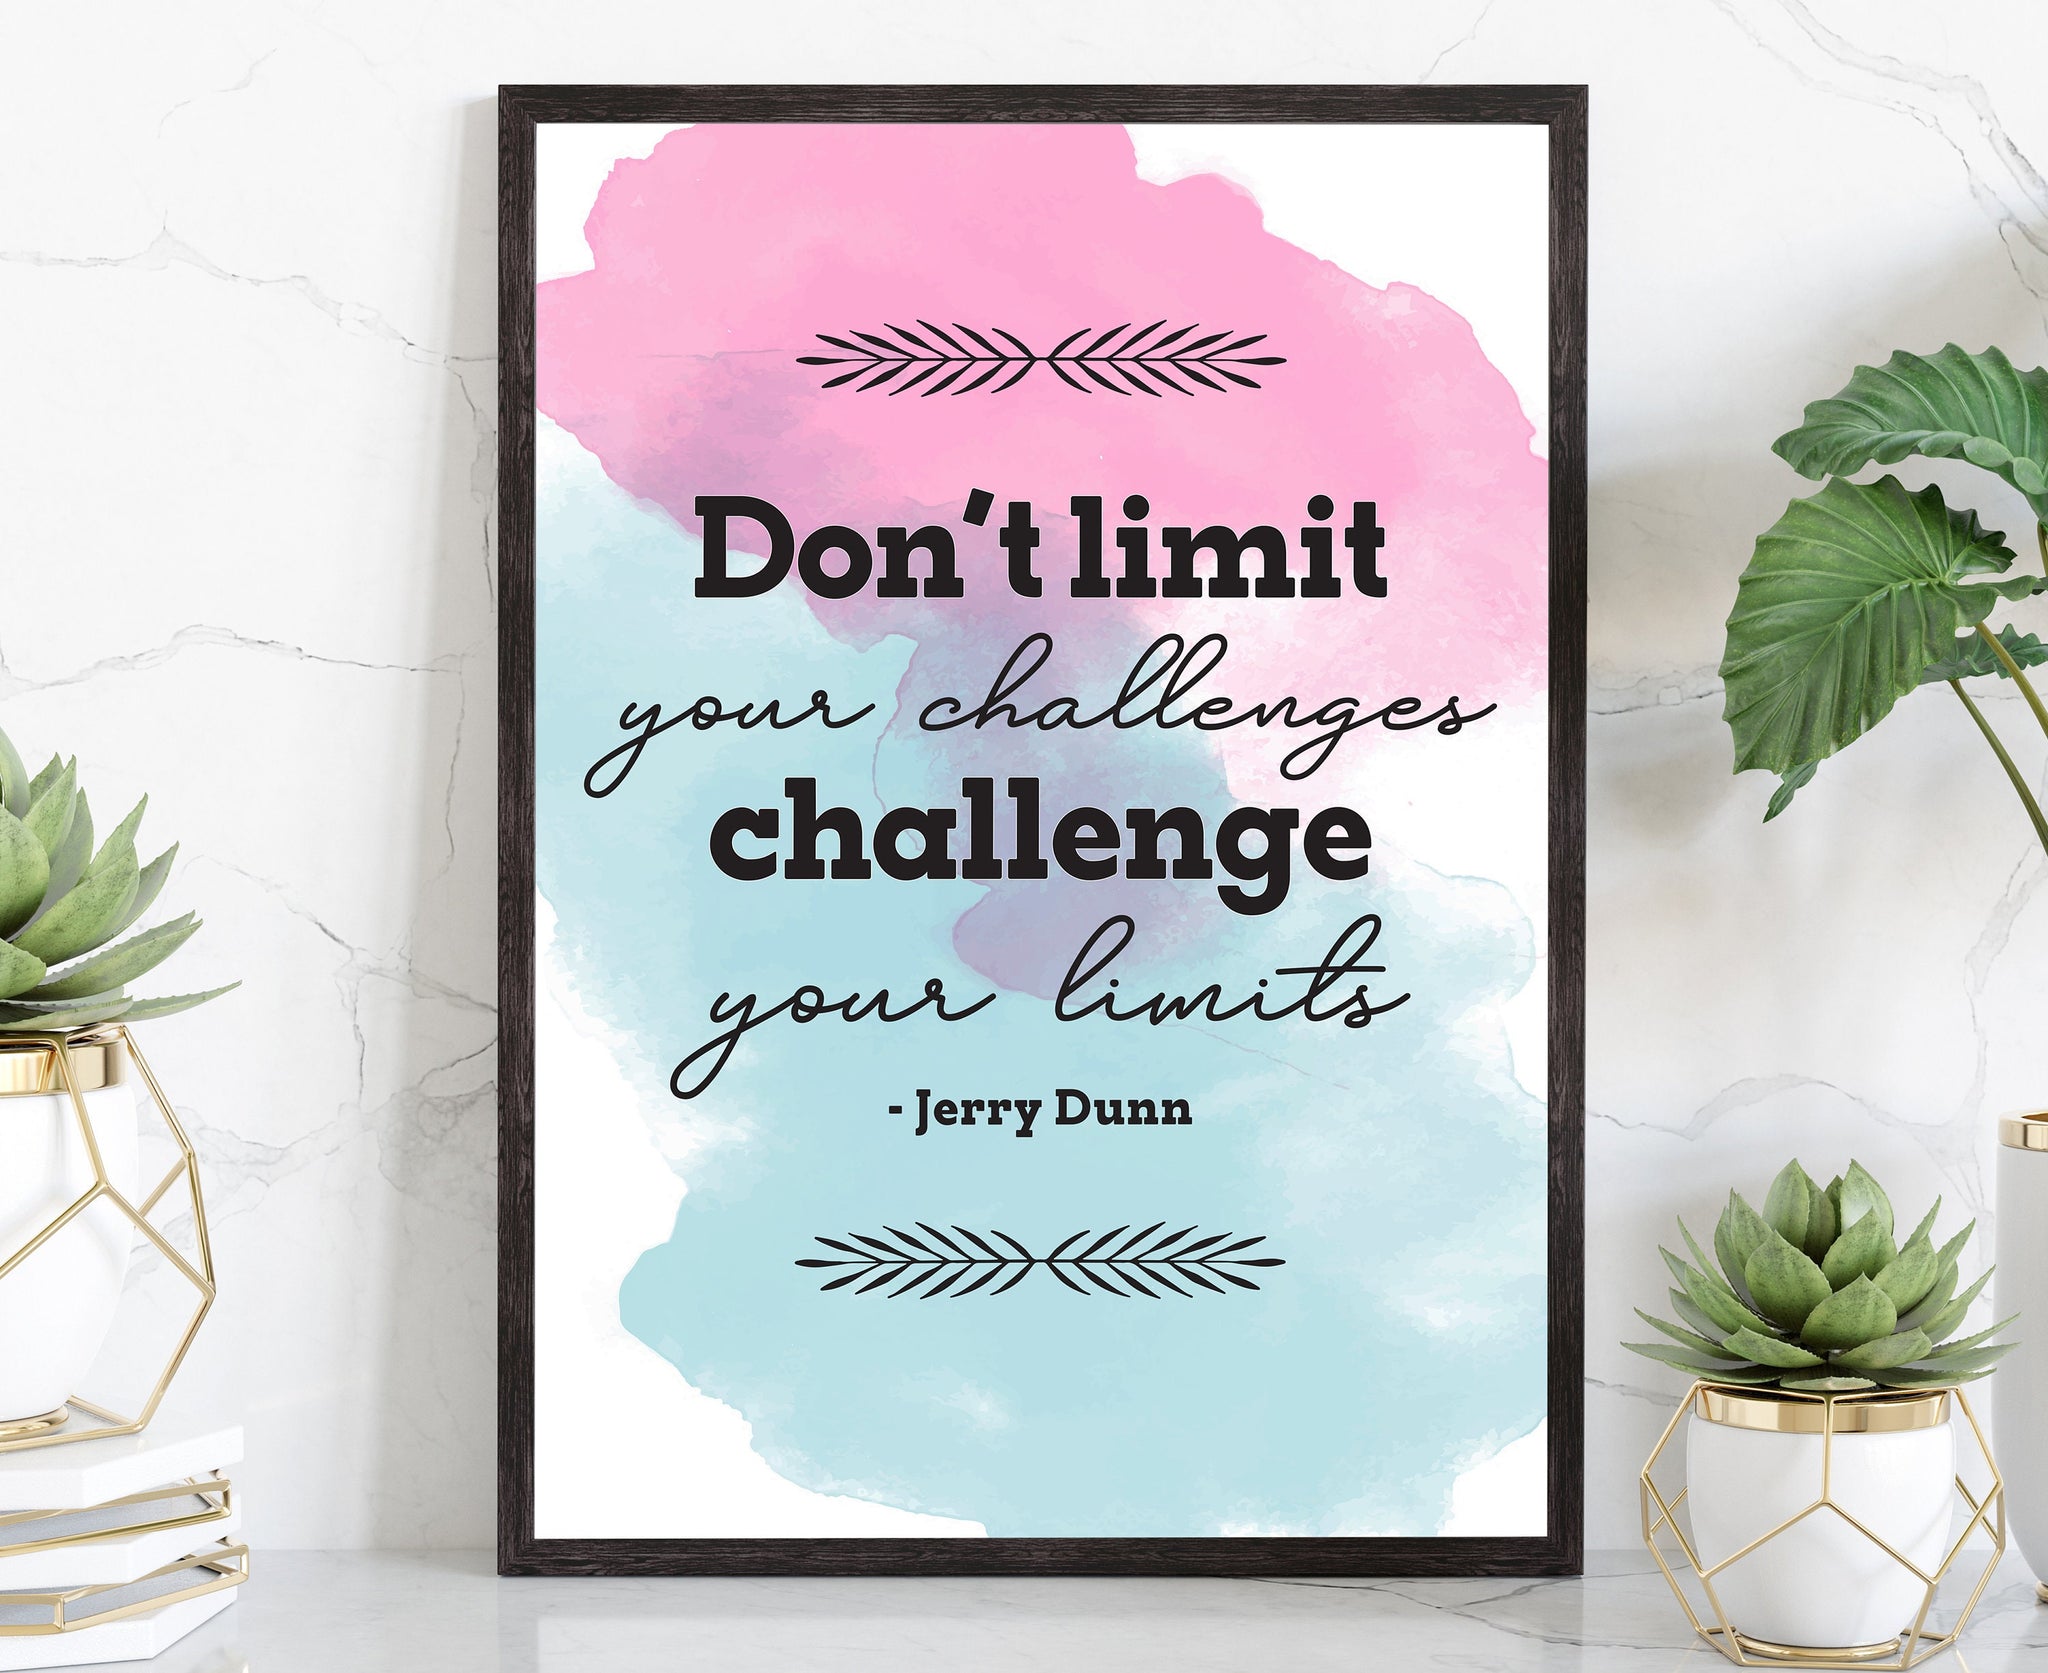 Don't limit your challenges.., Poster Prints, Home wall Arts, Dorm Rooms wall art, Office wall decor, Motivational quotes, Home gifts, Quote